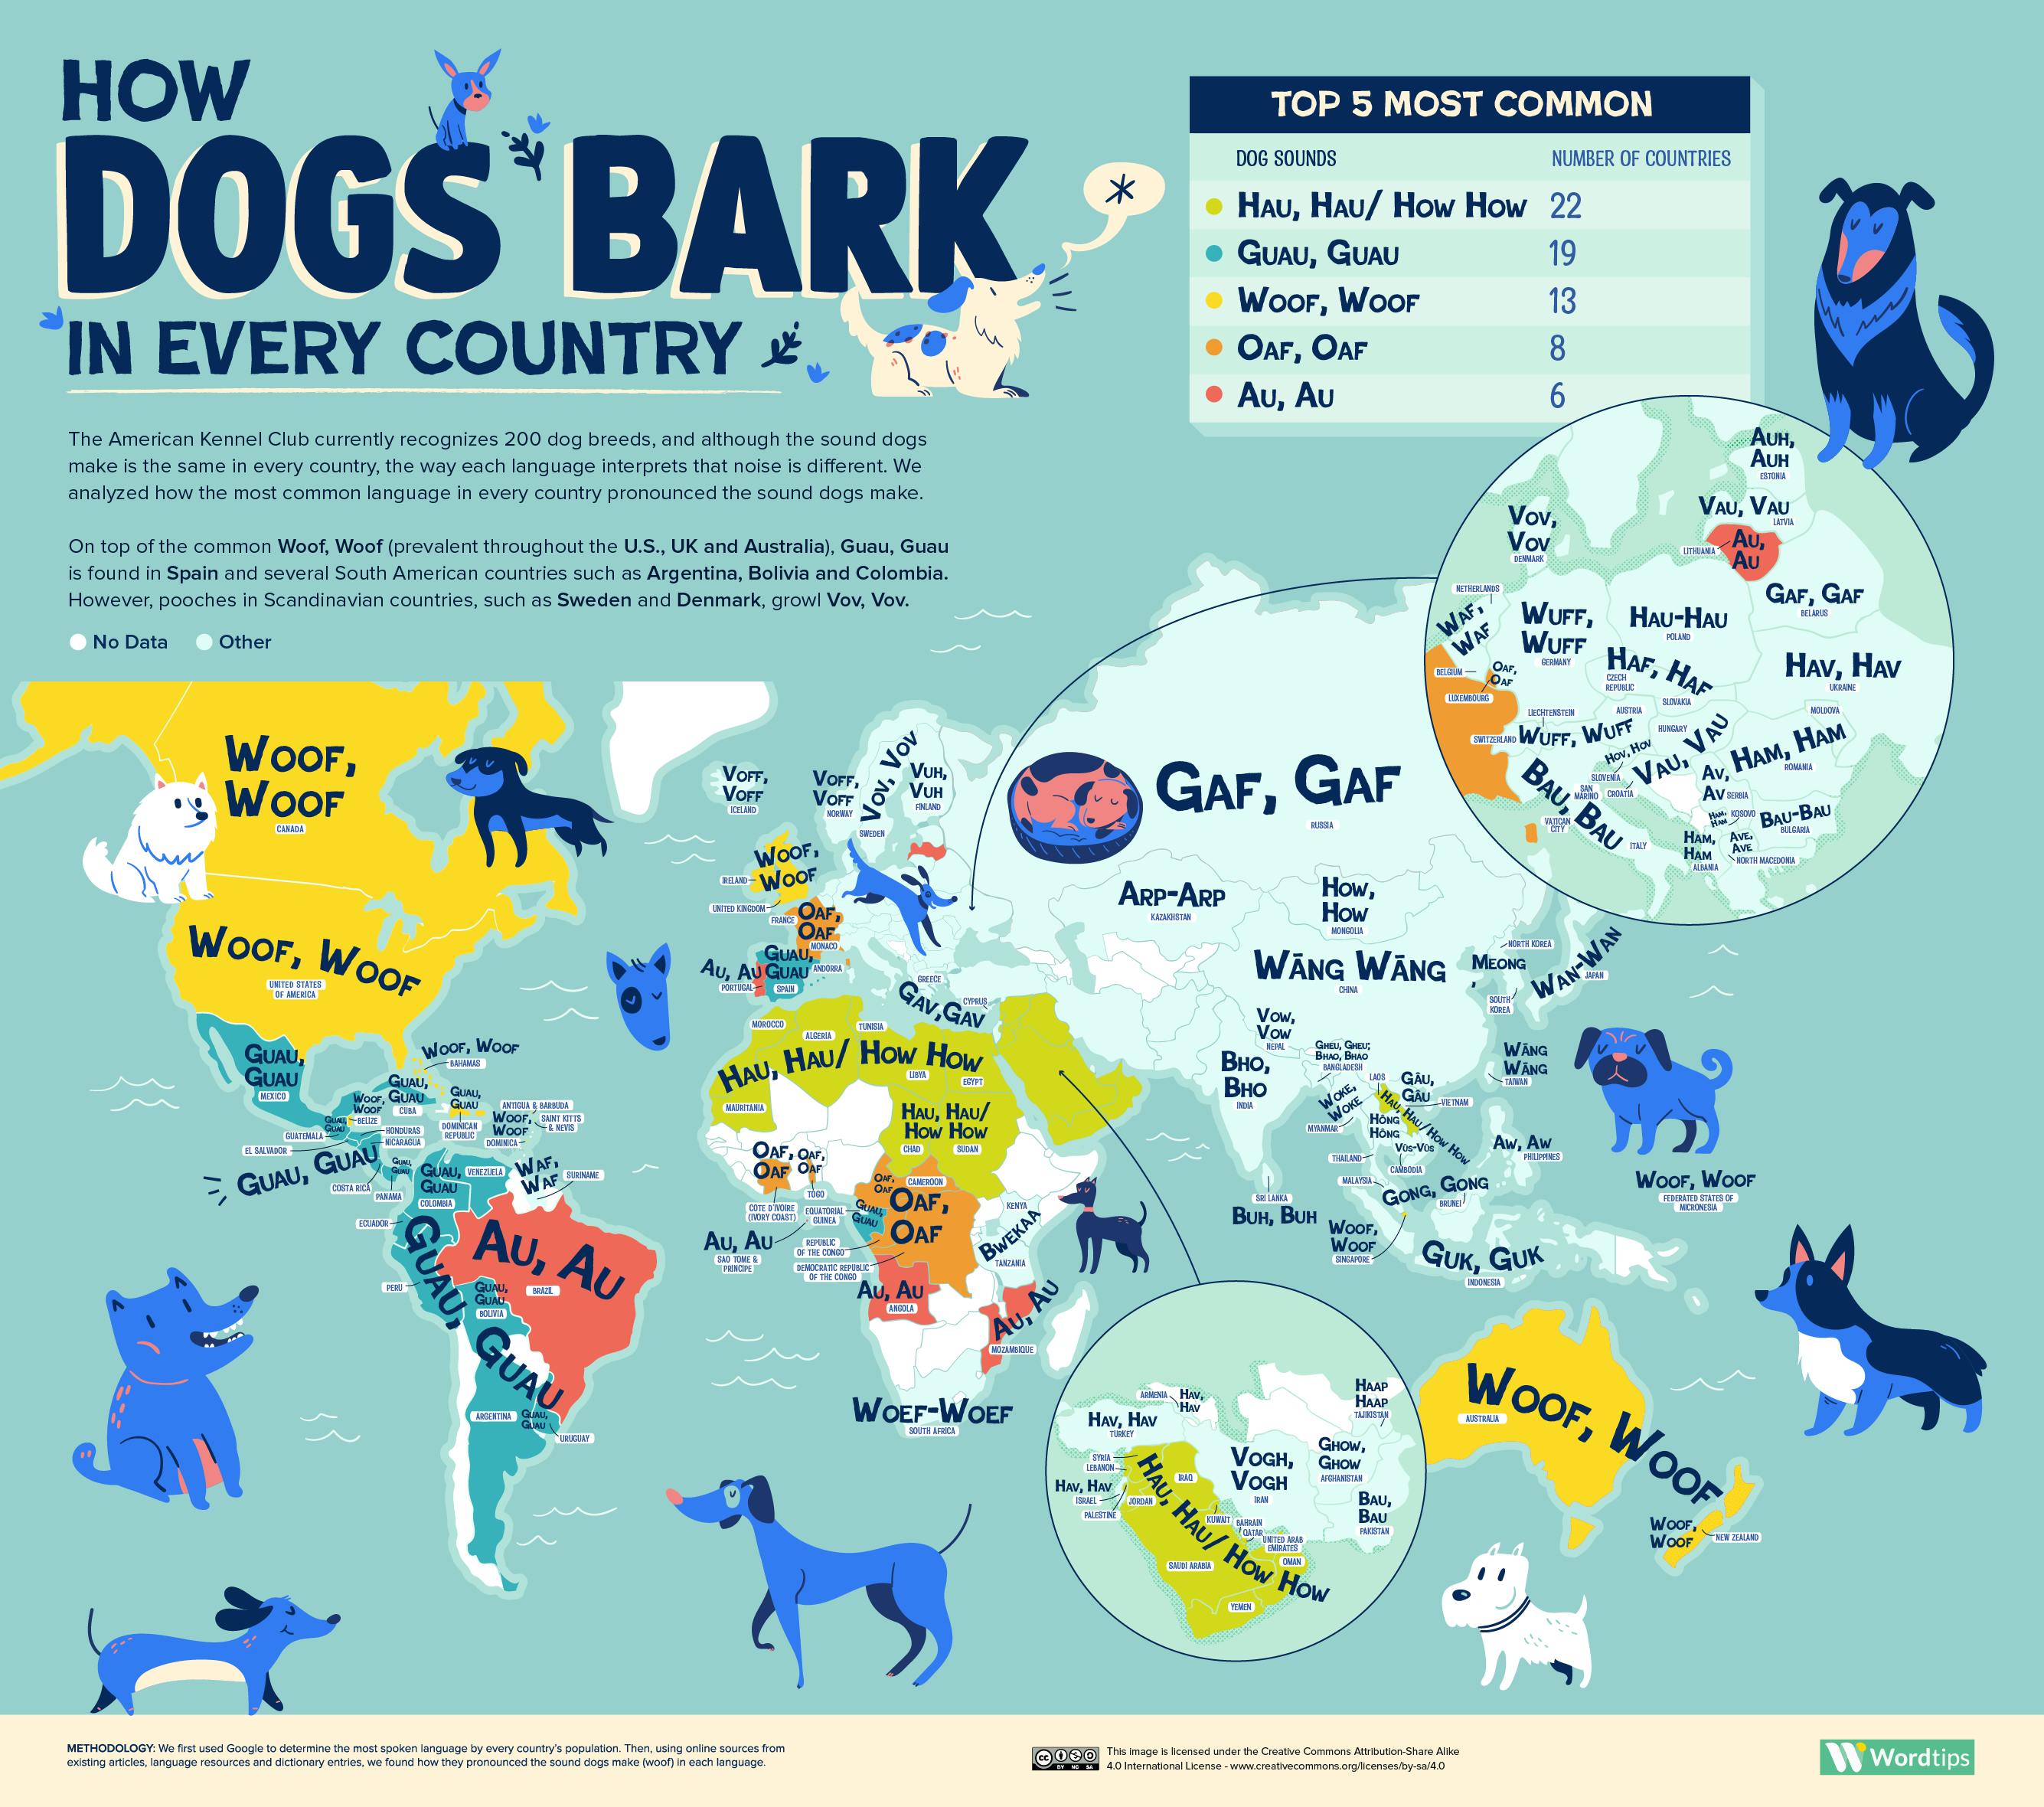 How Dogs Bark and Cats Meow in Every Country - Word Tips